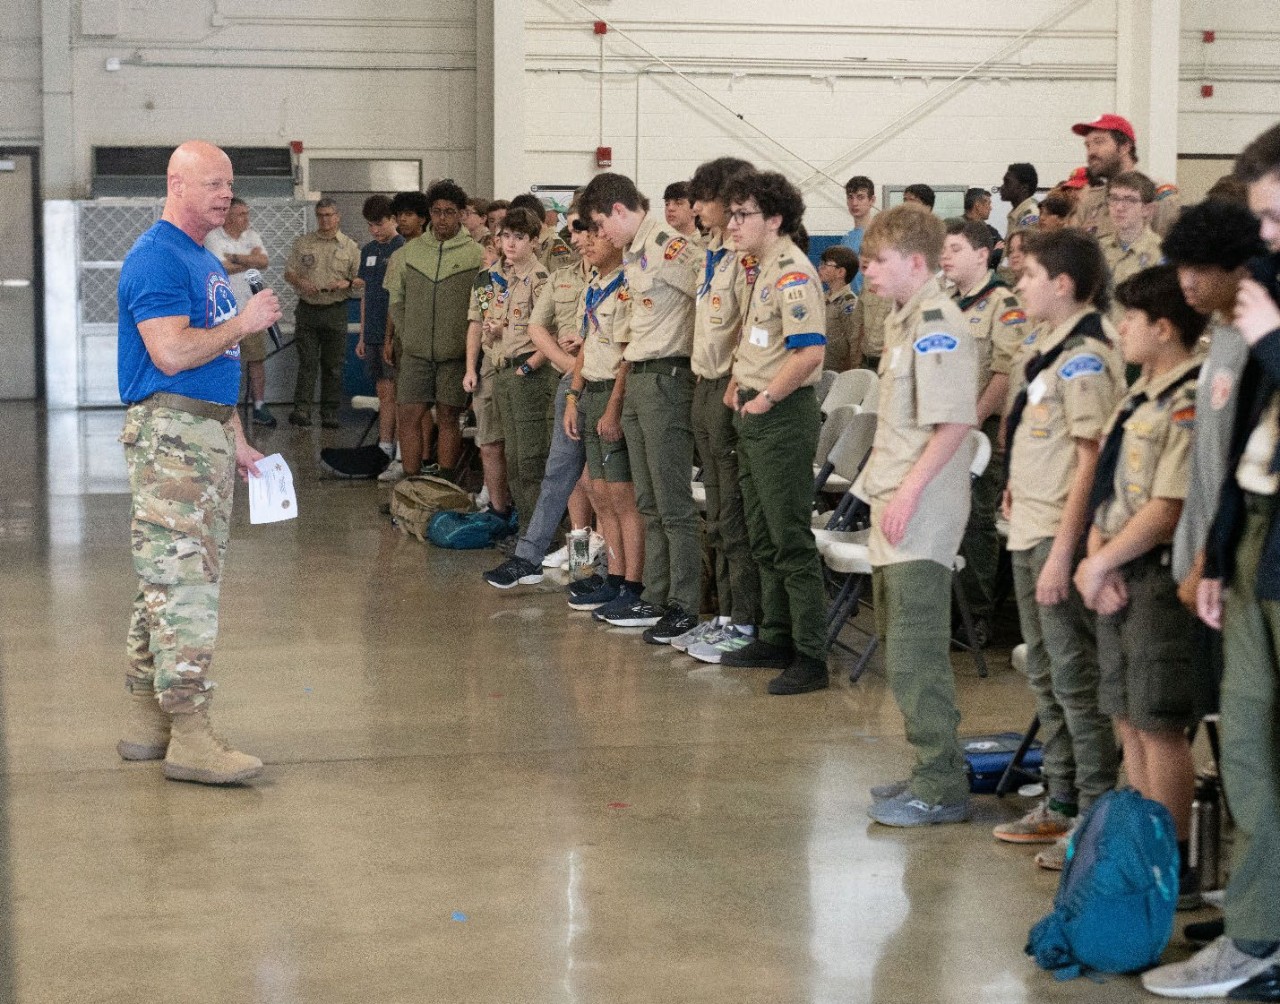 Sgt. 1st Class Ken Weichert talks with scouts during the opening ceremony for the 3rd Annual Merit Badge University hosted by the Tennessee Military Department at Nashville’s Joint Force Headquarters, April 27. (photo by Staff Sgt. Matthew Brown)